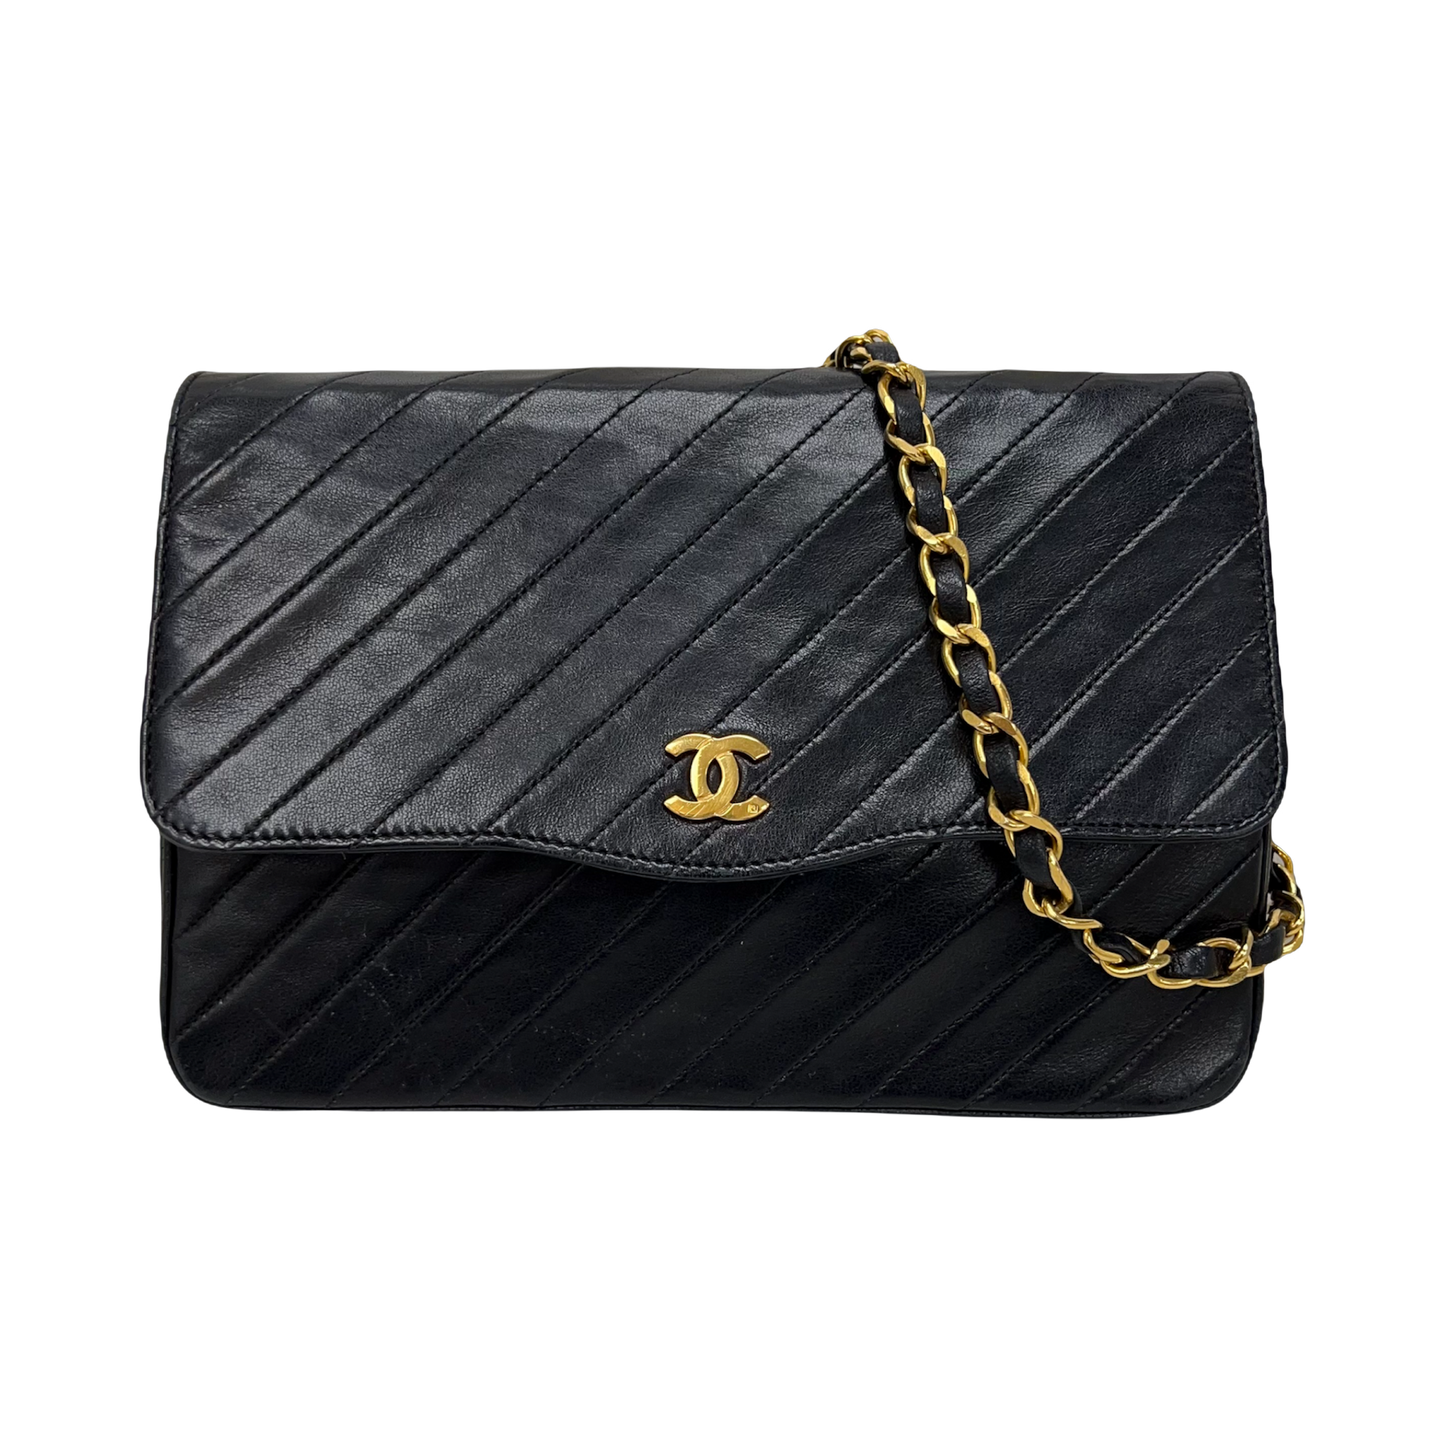 Chanel Lambskin Diagonal Quilted Flap Bag